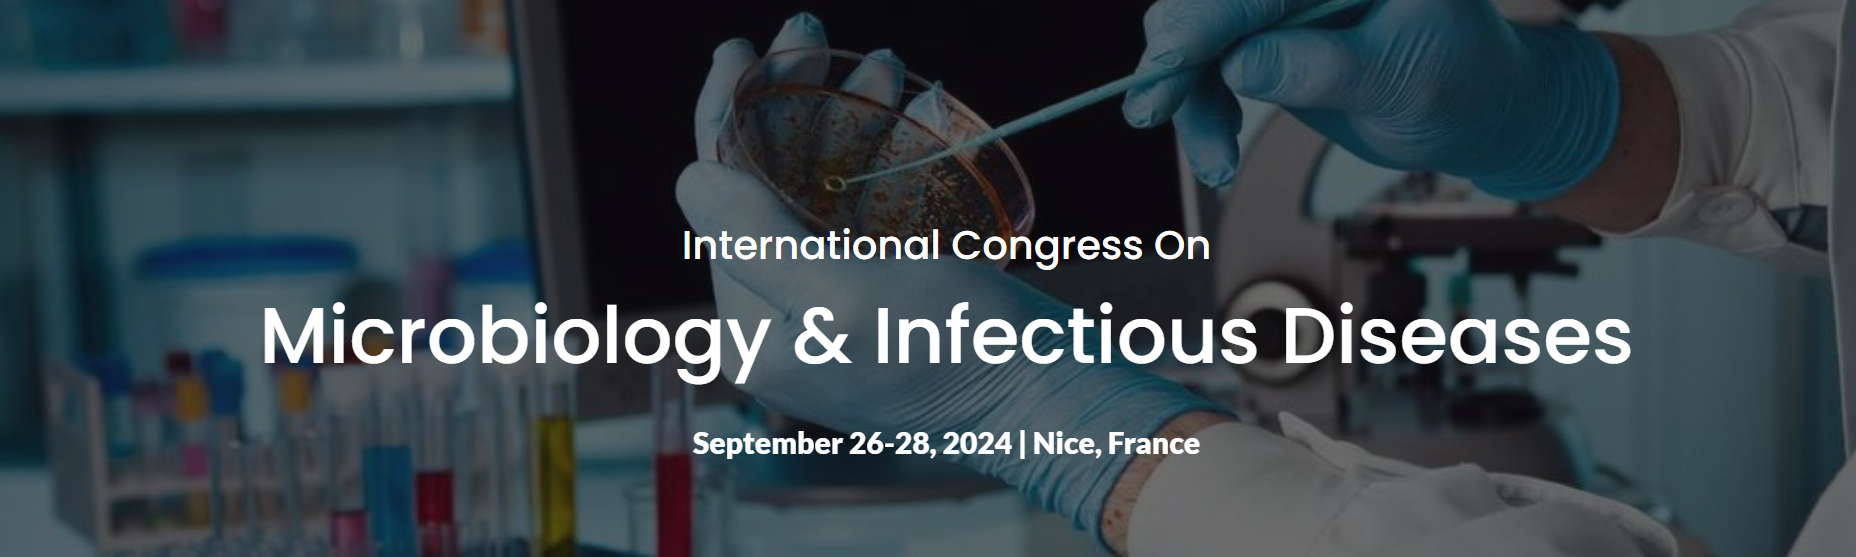 International Congress of Microbiology and Infectious Diseases, Nice, Nièvre, France